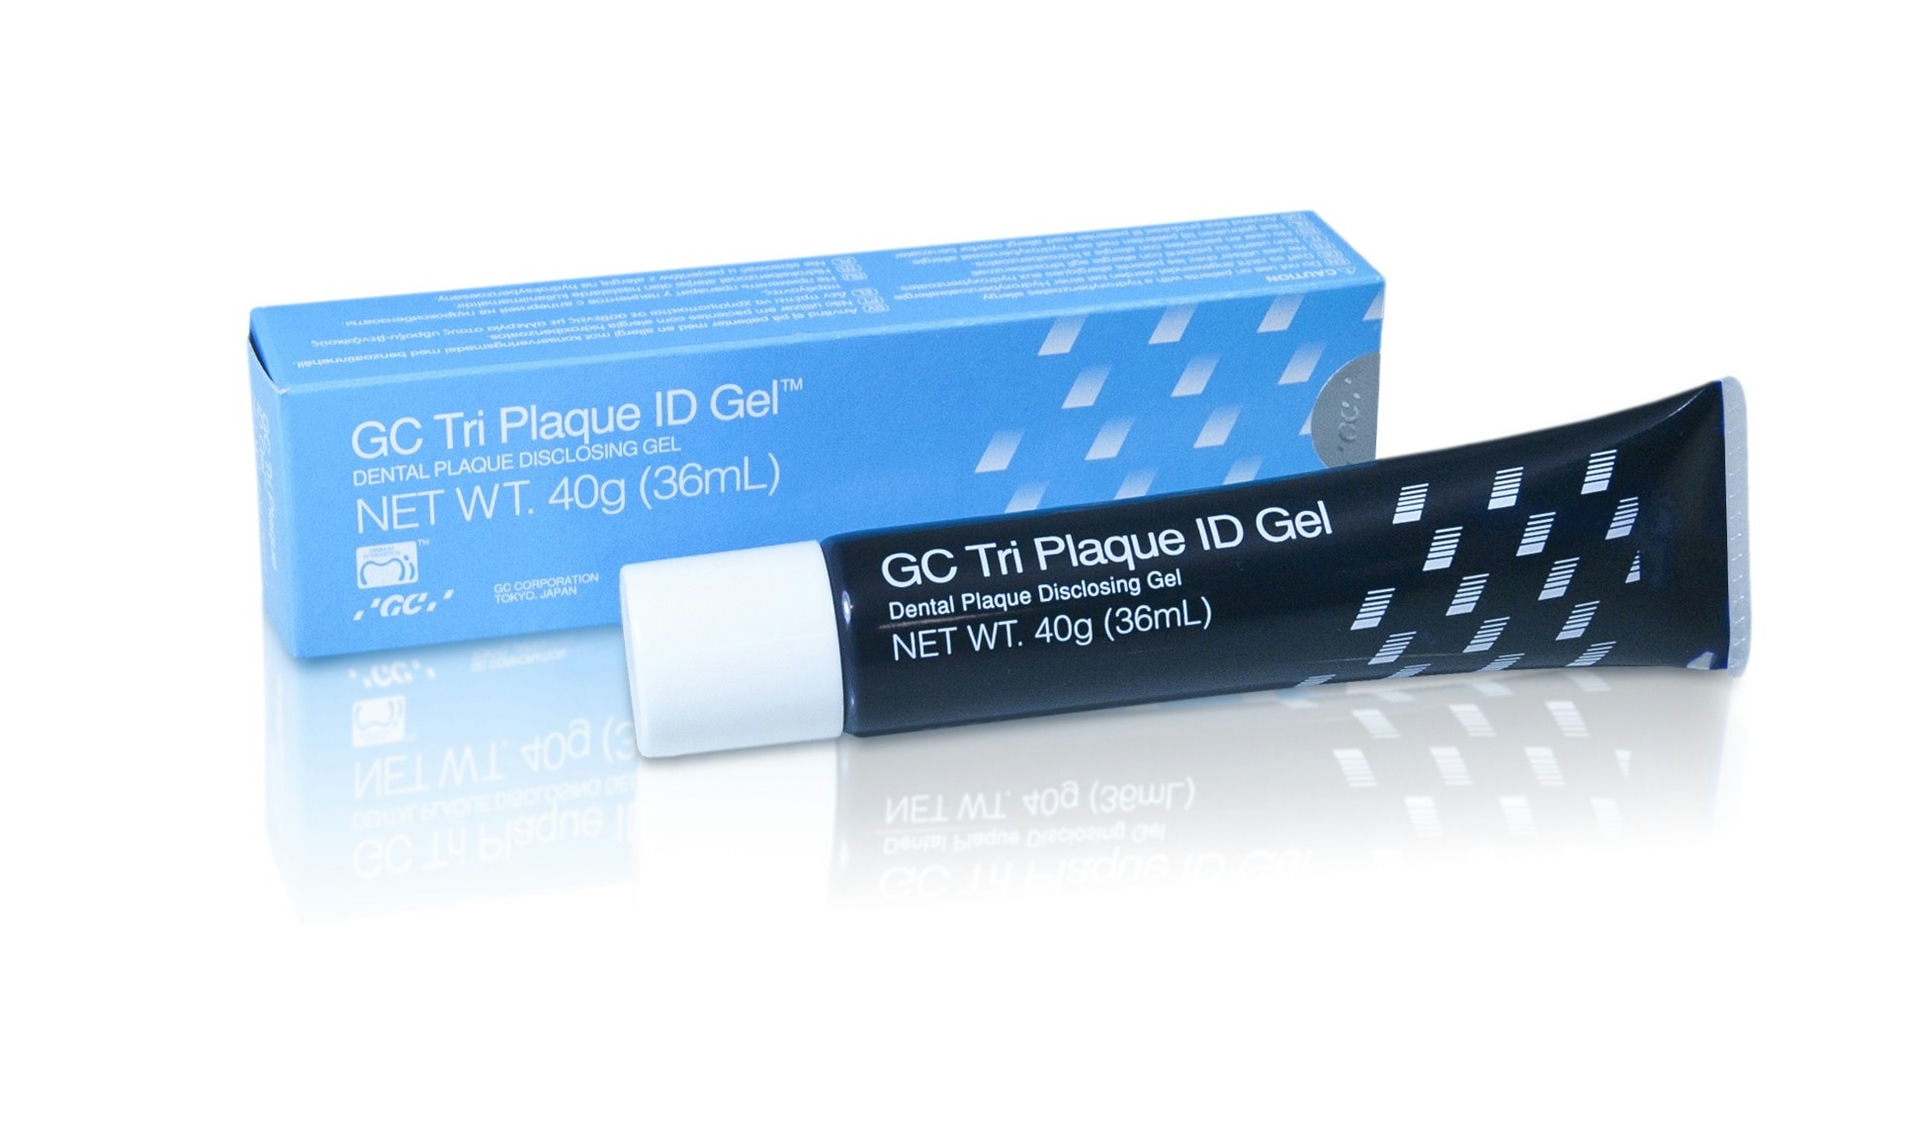 The GC Tri Plaque ID Gel from GC America.